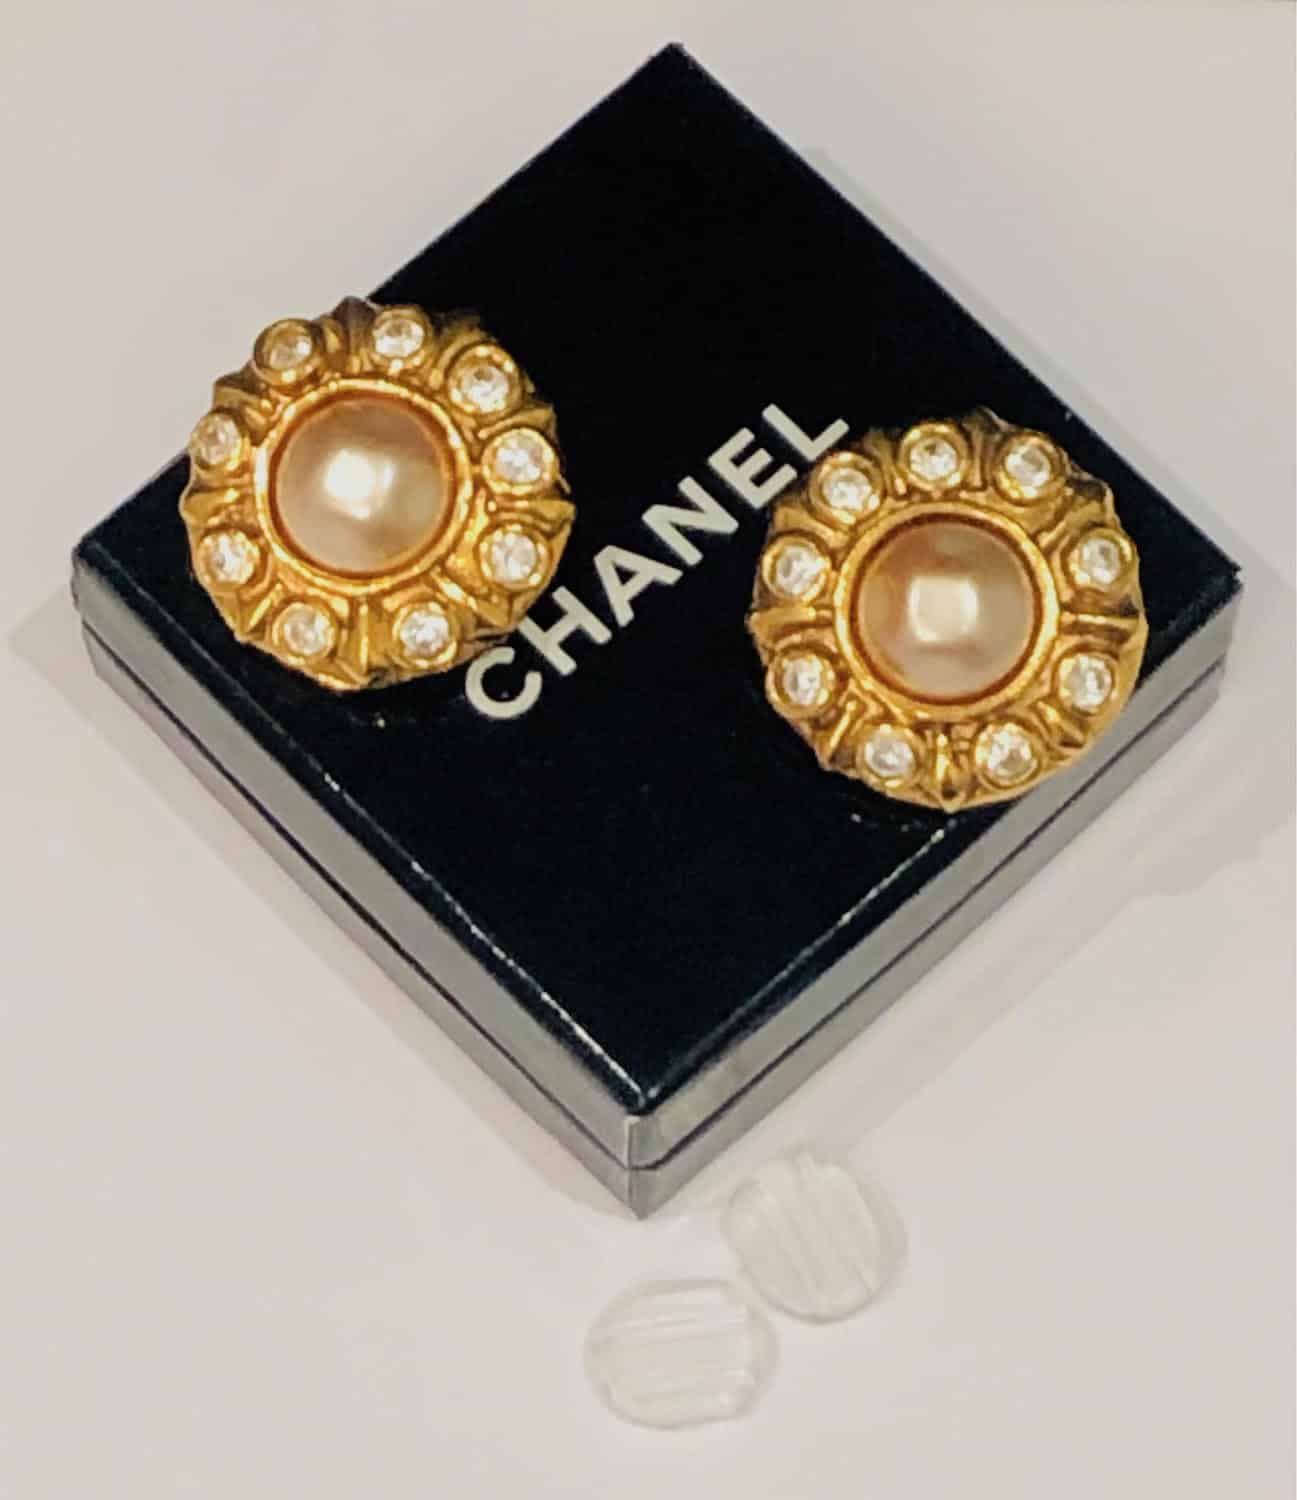 CHANEL Earrings 1970s Vintage Faceted Pearl & Crystals Flower Clip